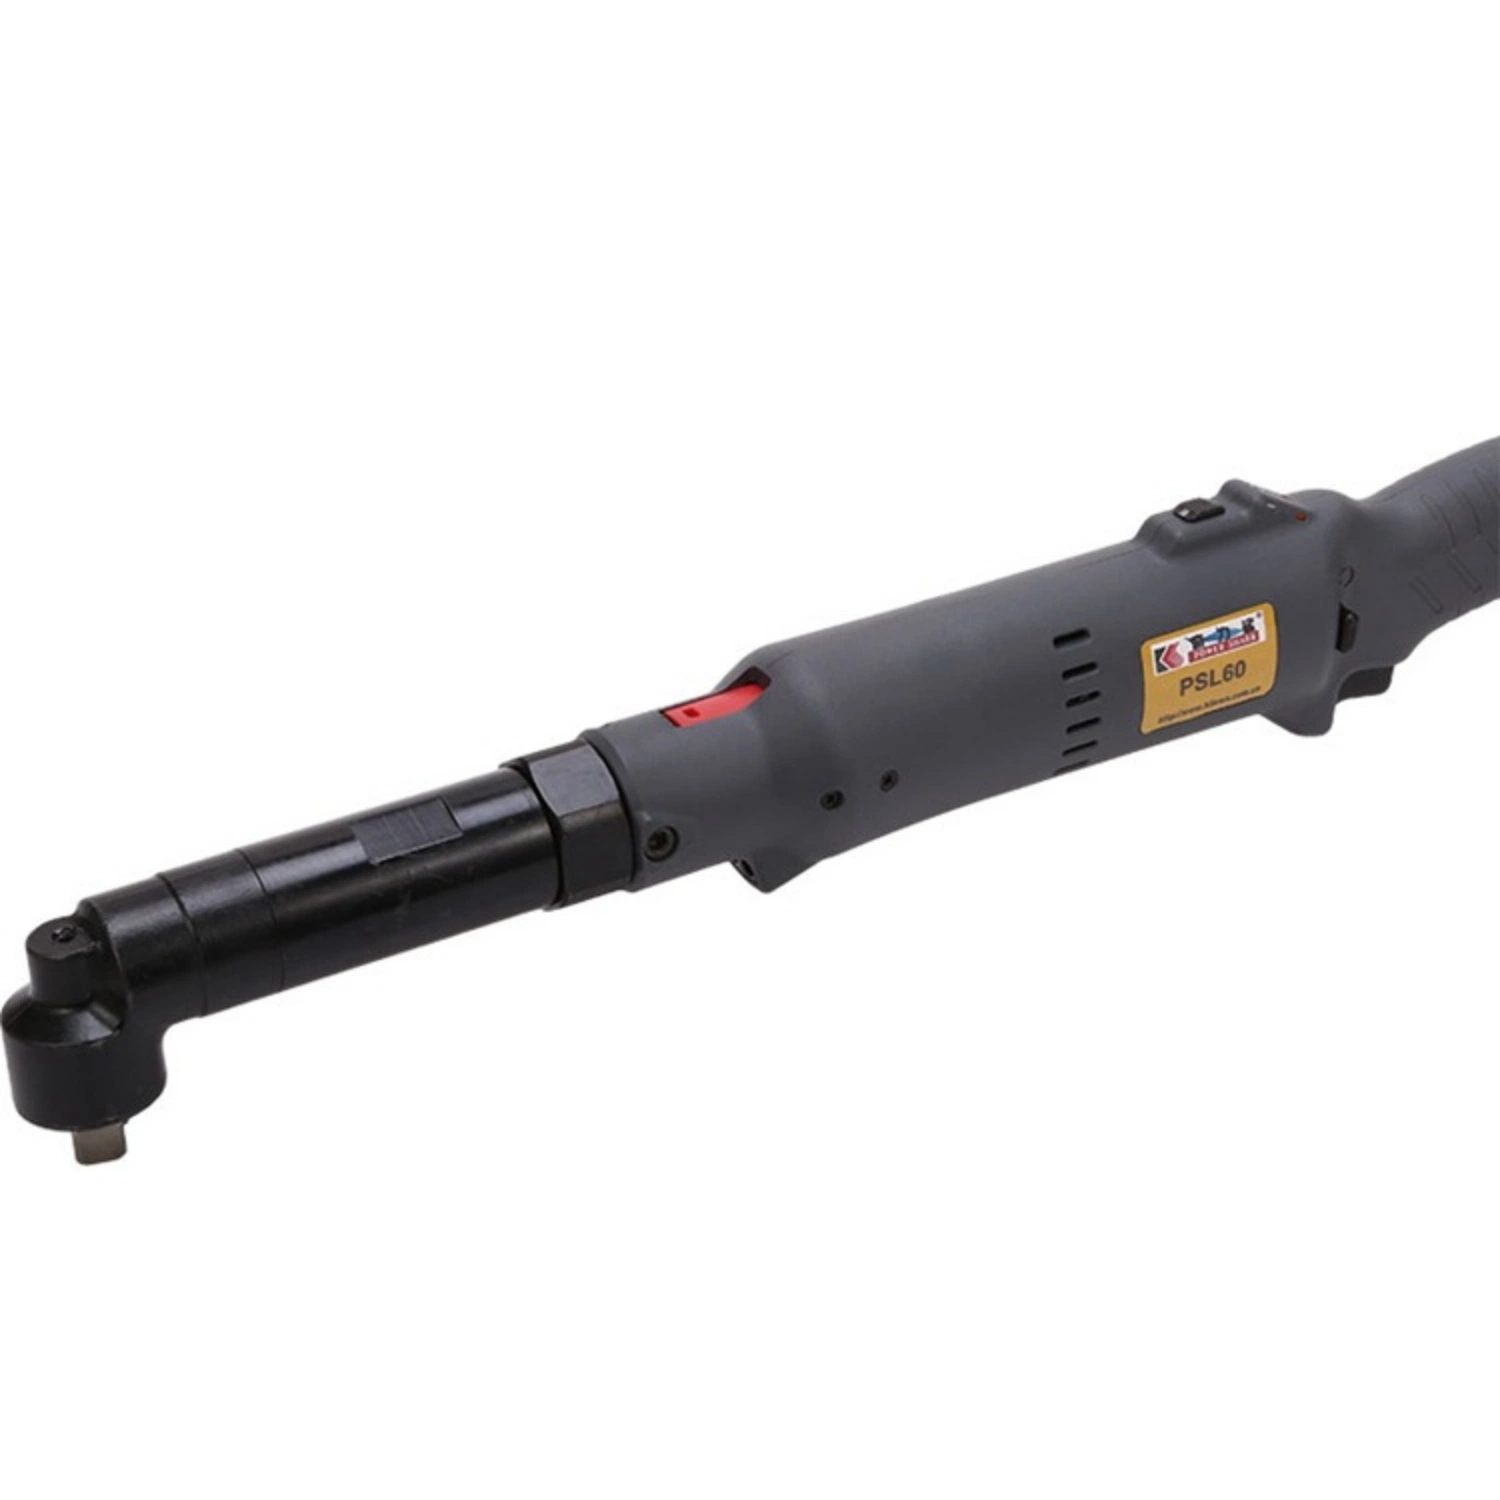 Fully Automatic Industrial Grade Brushless Rechargeable Electric Torque Screwdriver